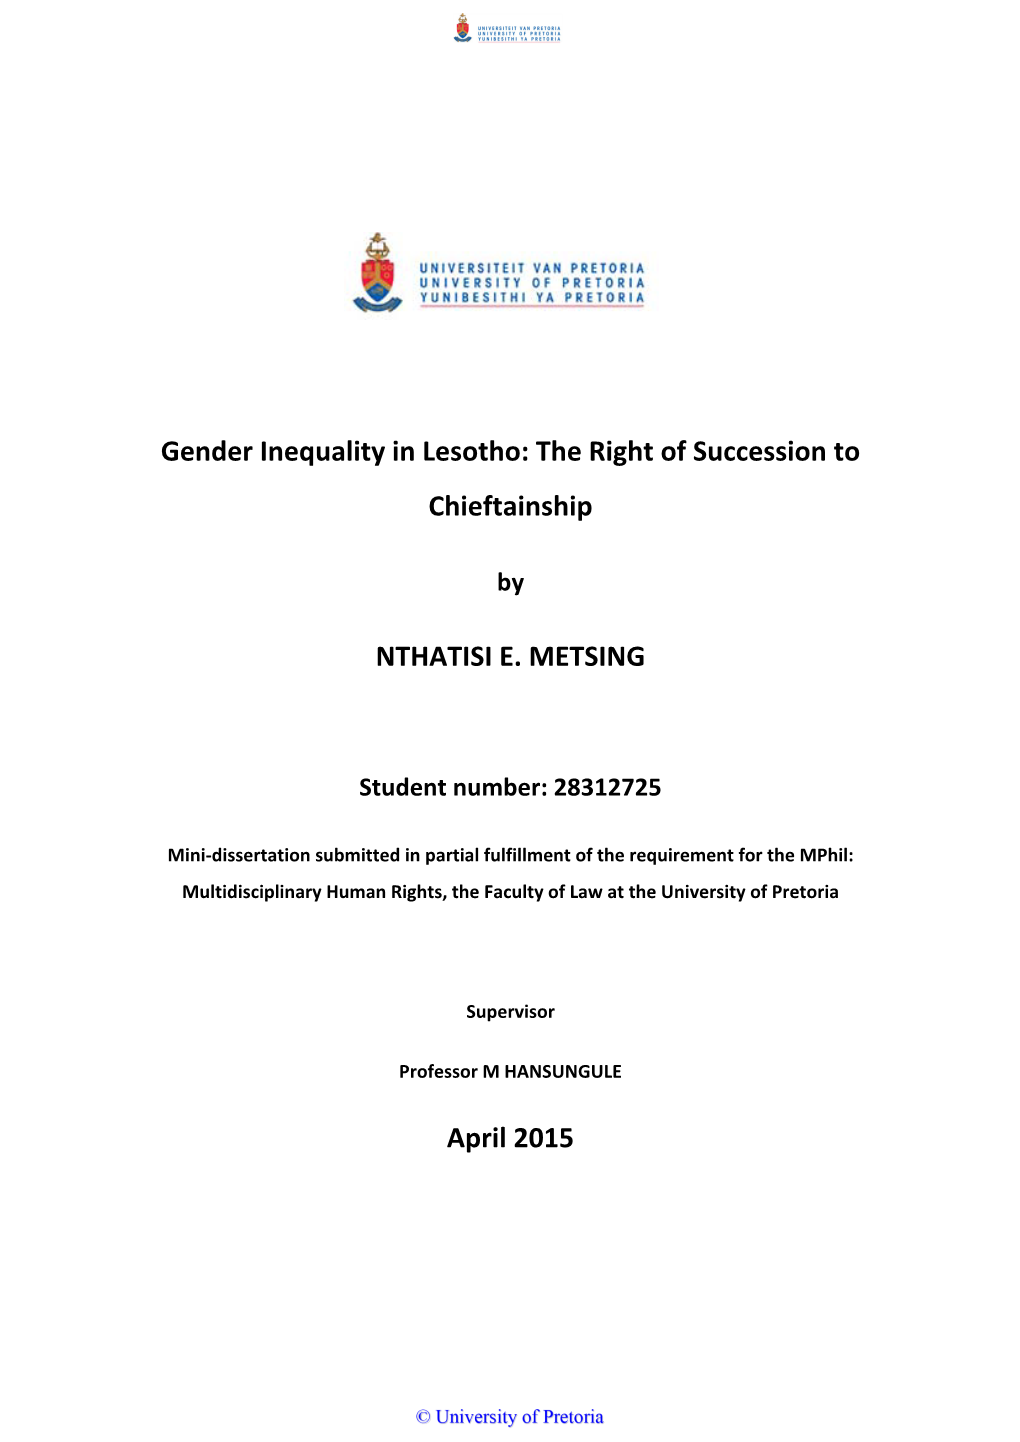 Gender Inequality in Lesotho: the Right of Succession to Chieftainship